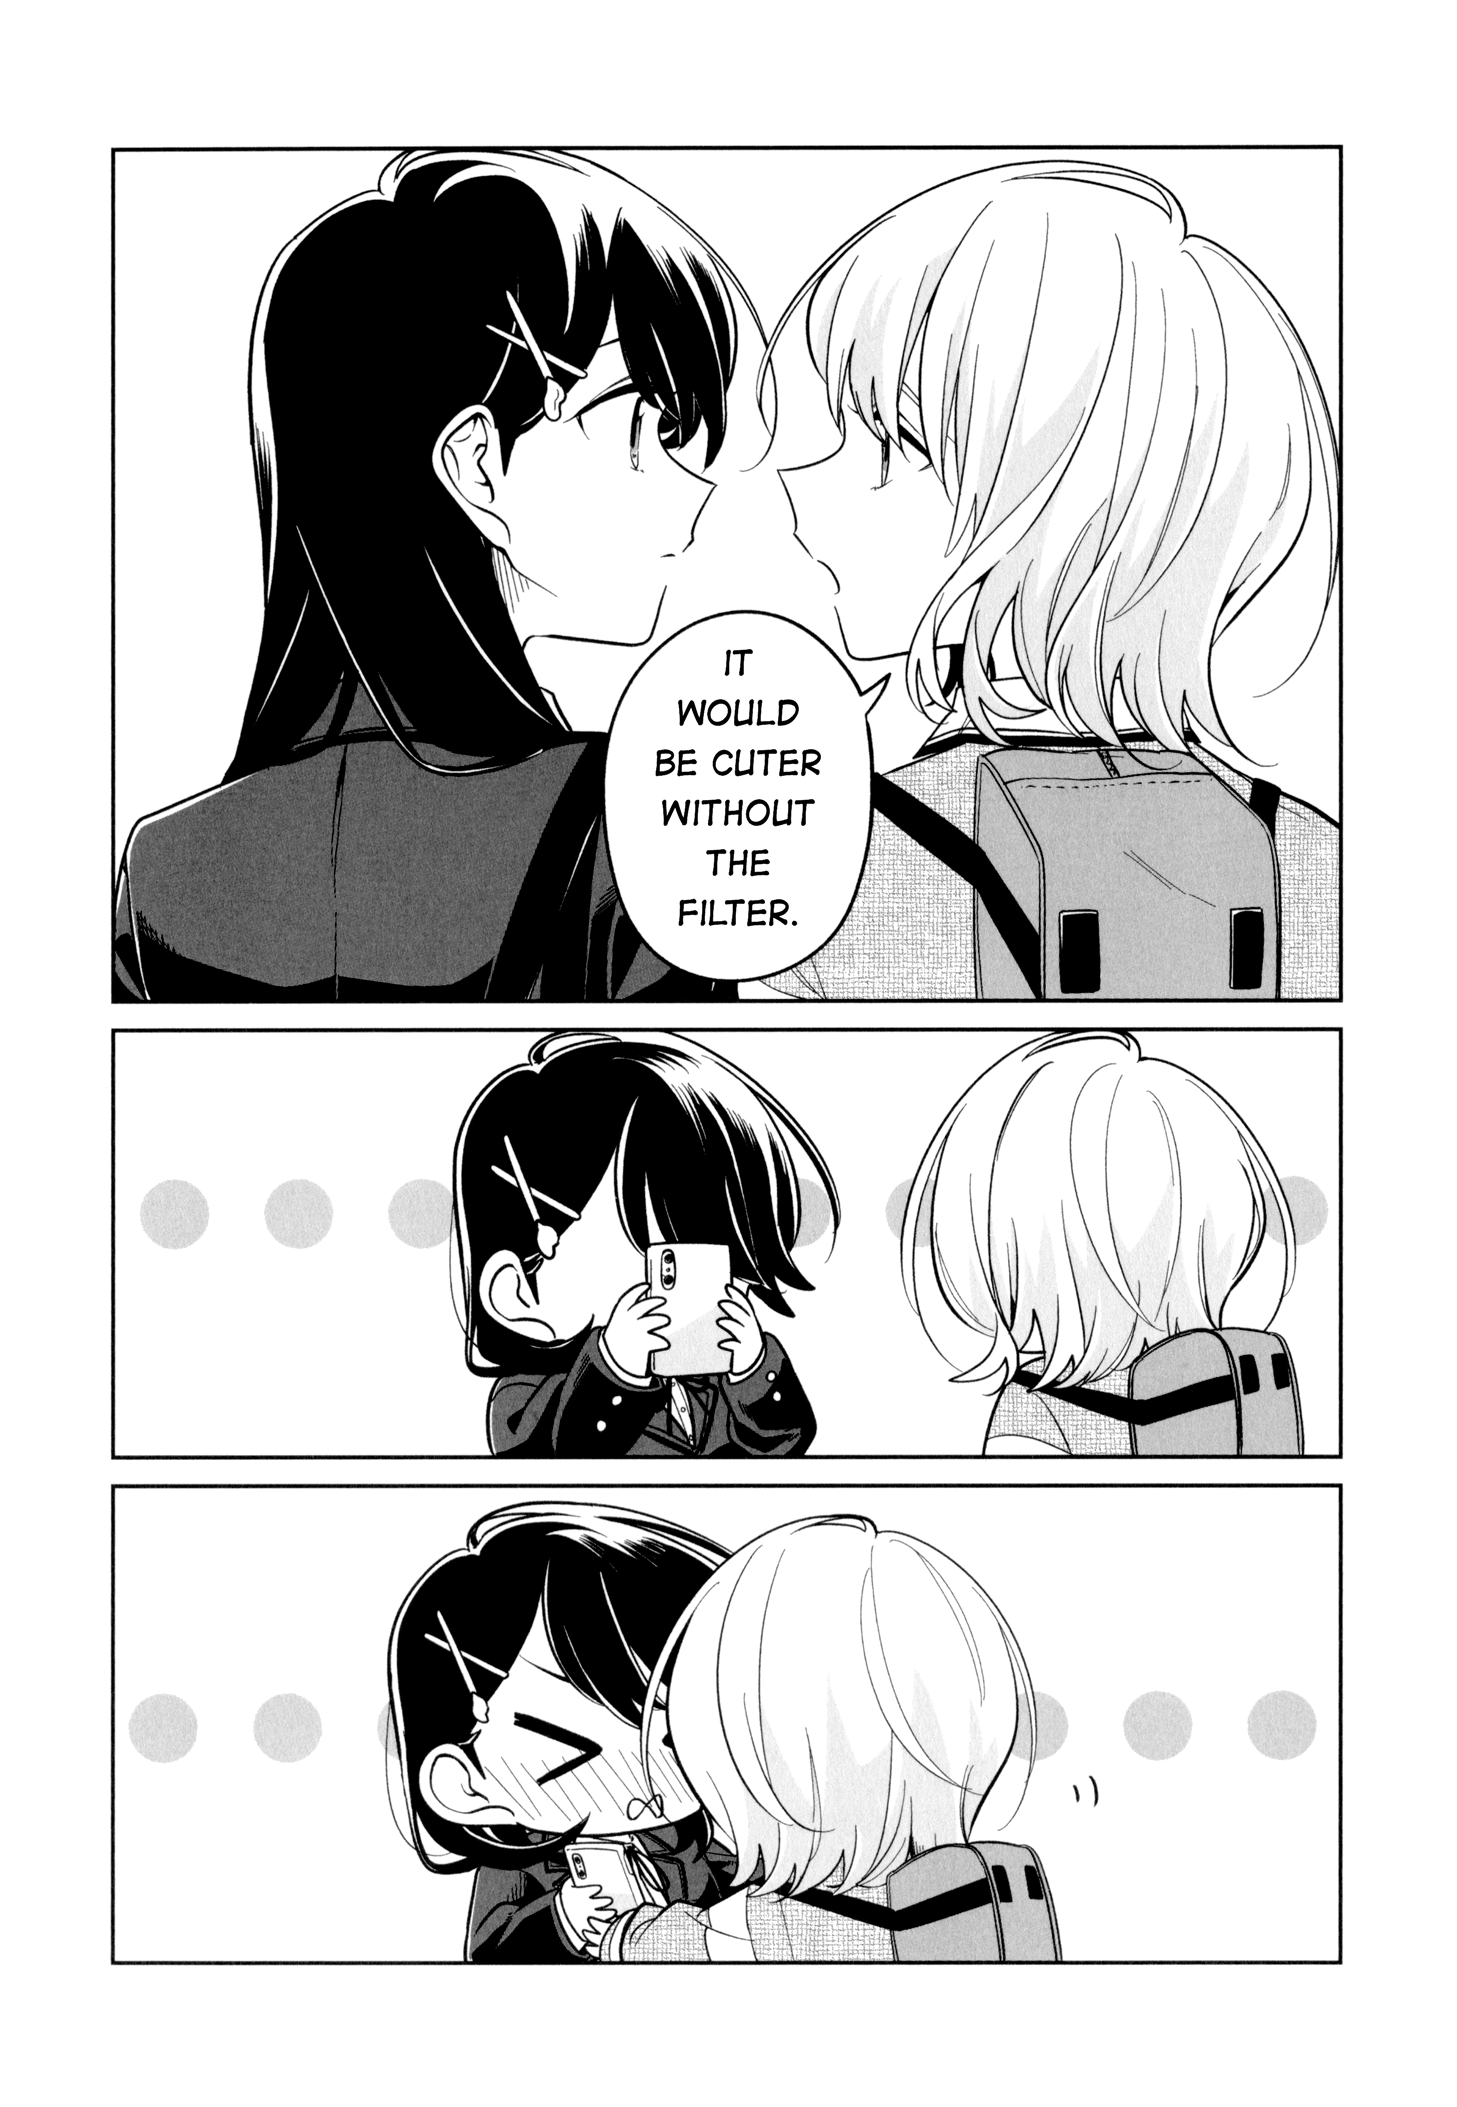 Can't Defy The Lonely Girl - Page 2